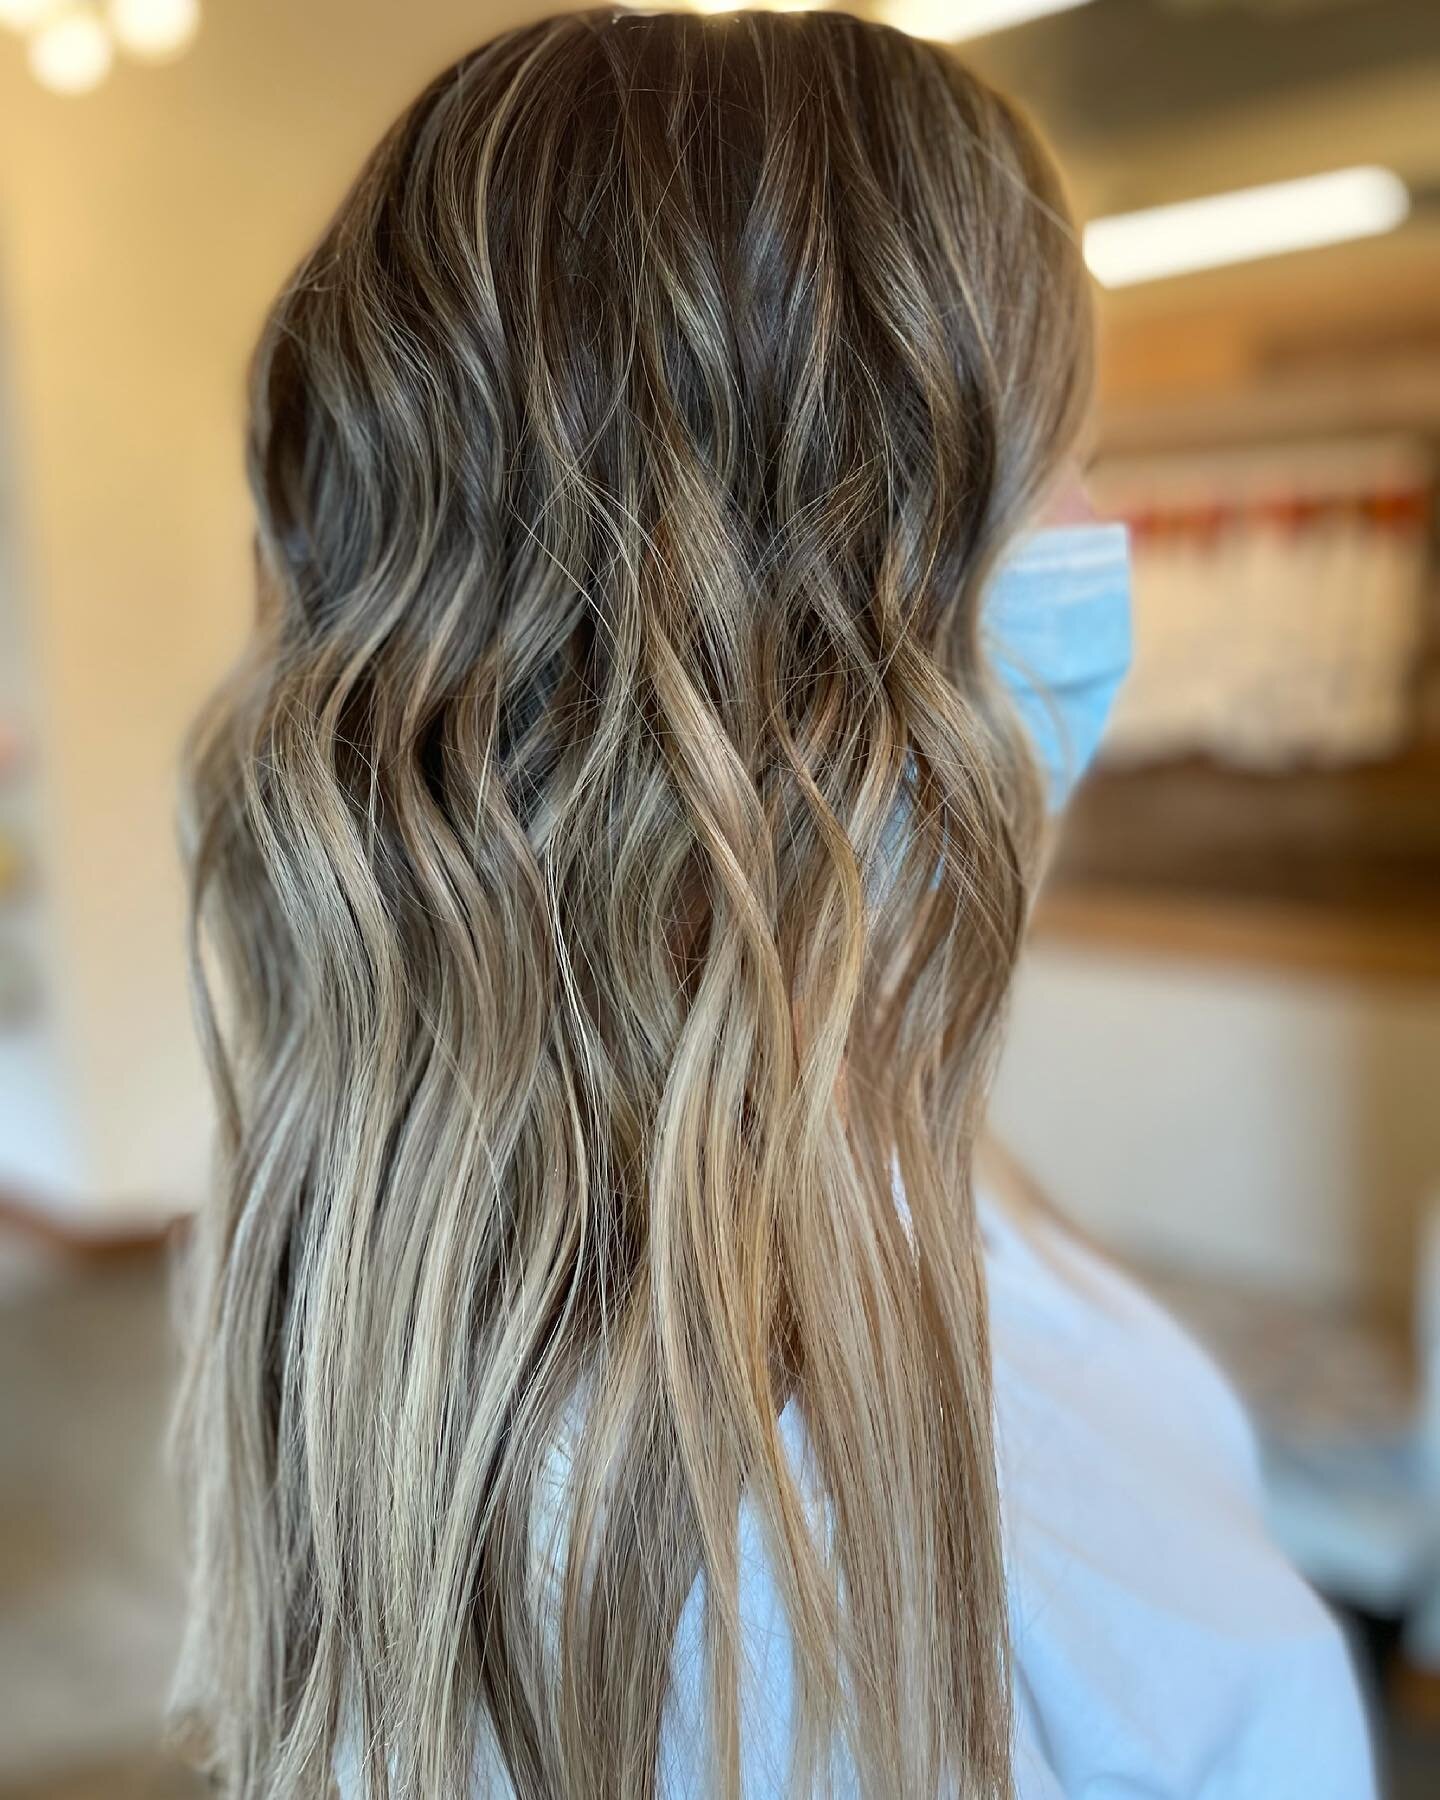 Same same, but different 🤷🏼&zwj;♀️
.
.
Text or DM me to book an appointment!
.
.
503.560.6363
.
.
#hairbyruthstrauss #coteriesalonpdx #portlandhairstylist #pdxhairstylist #behindthechair #balayage #balayagist #bestofbalayage